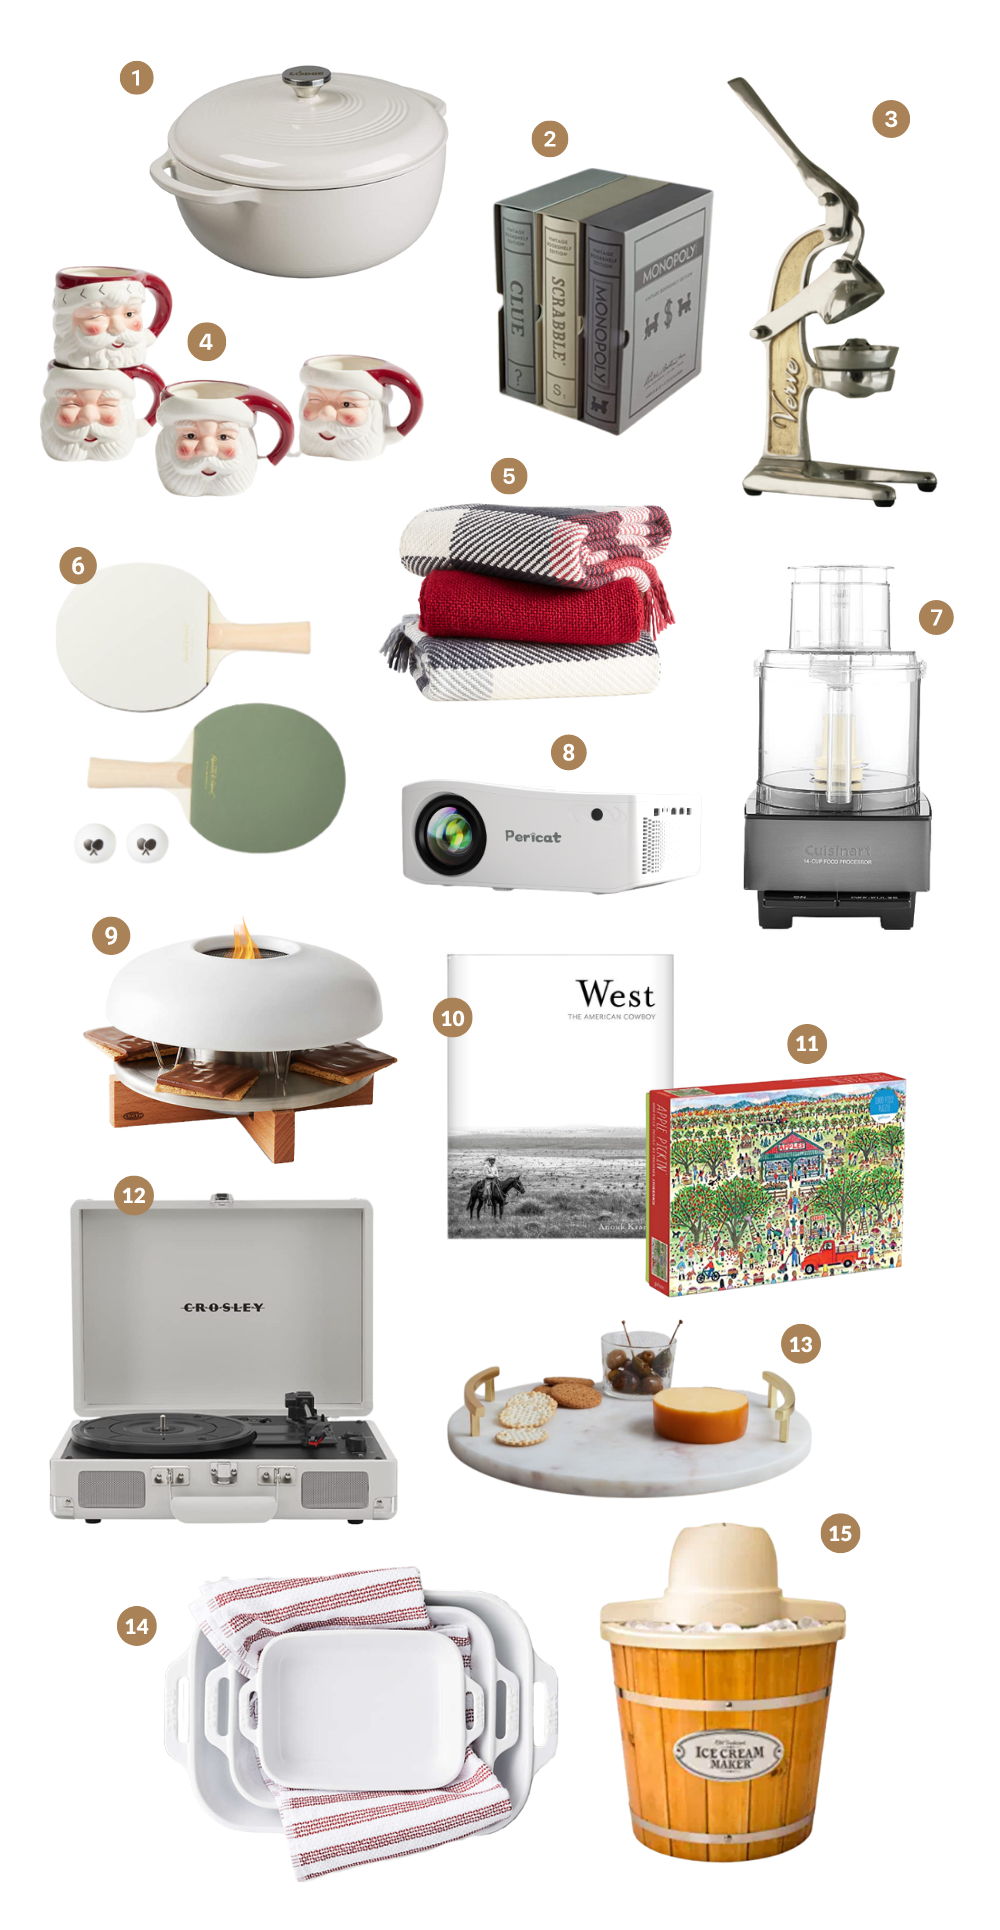 Holiday gift guide for this holiday season! It's my 2022 gift guide for the home and family and I hope you find something you would love to gift this Christmas season! Be sure and catch the full Gift Guide Week over on KaraLayne.com!